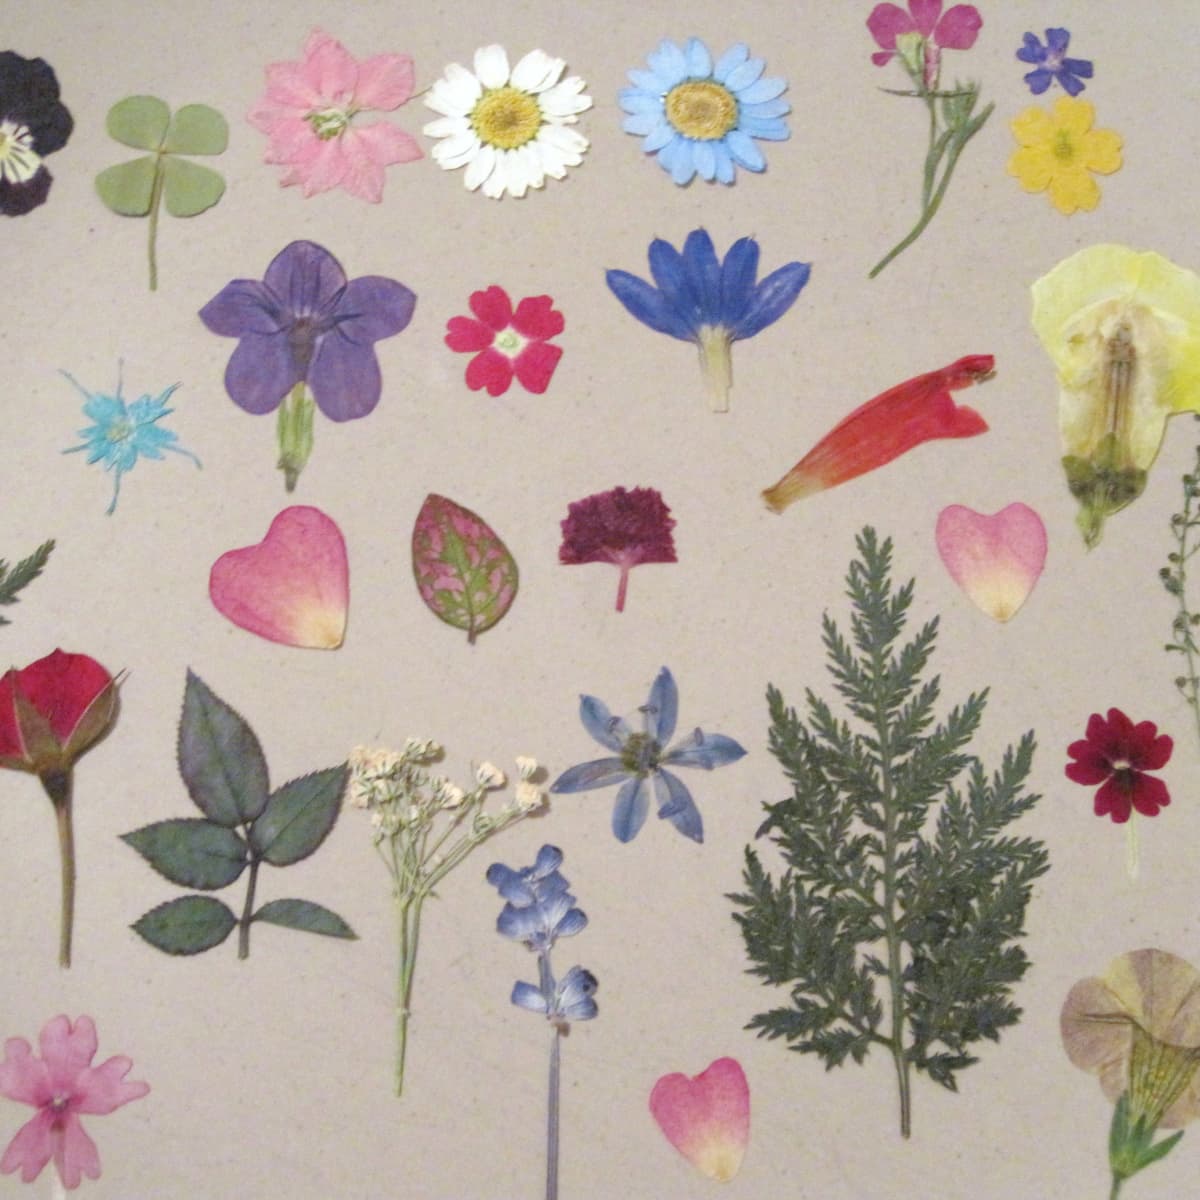 9 Creative Project Ideas for Pressed Flowers  Pressed flower crafts, Flower  crafts, Pressed flower art